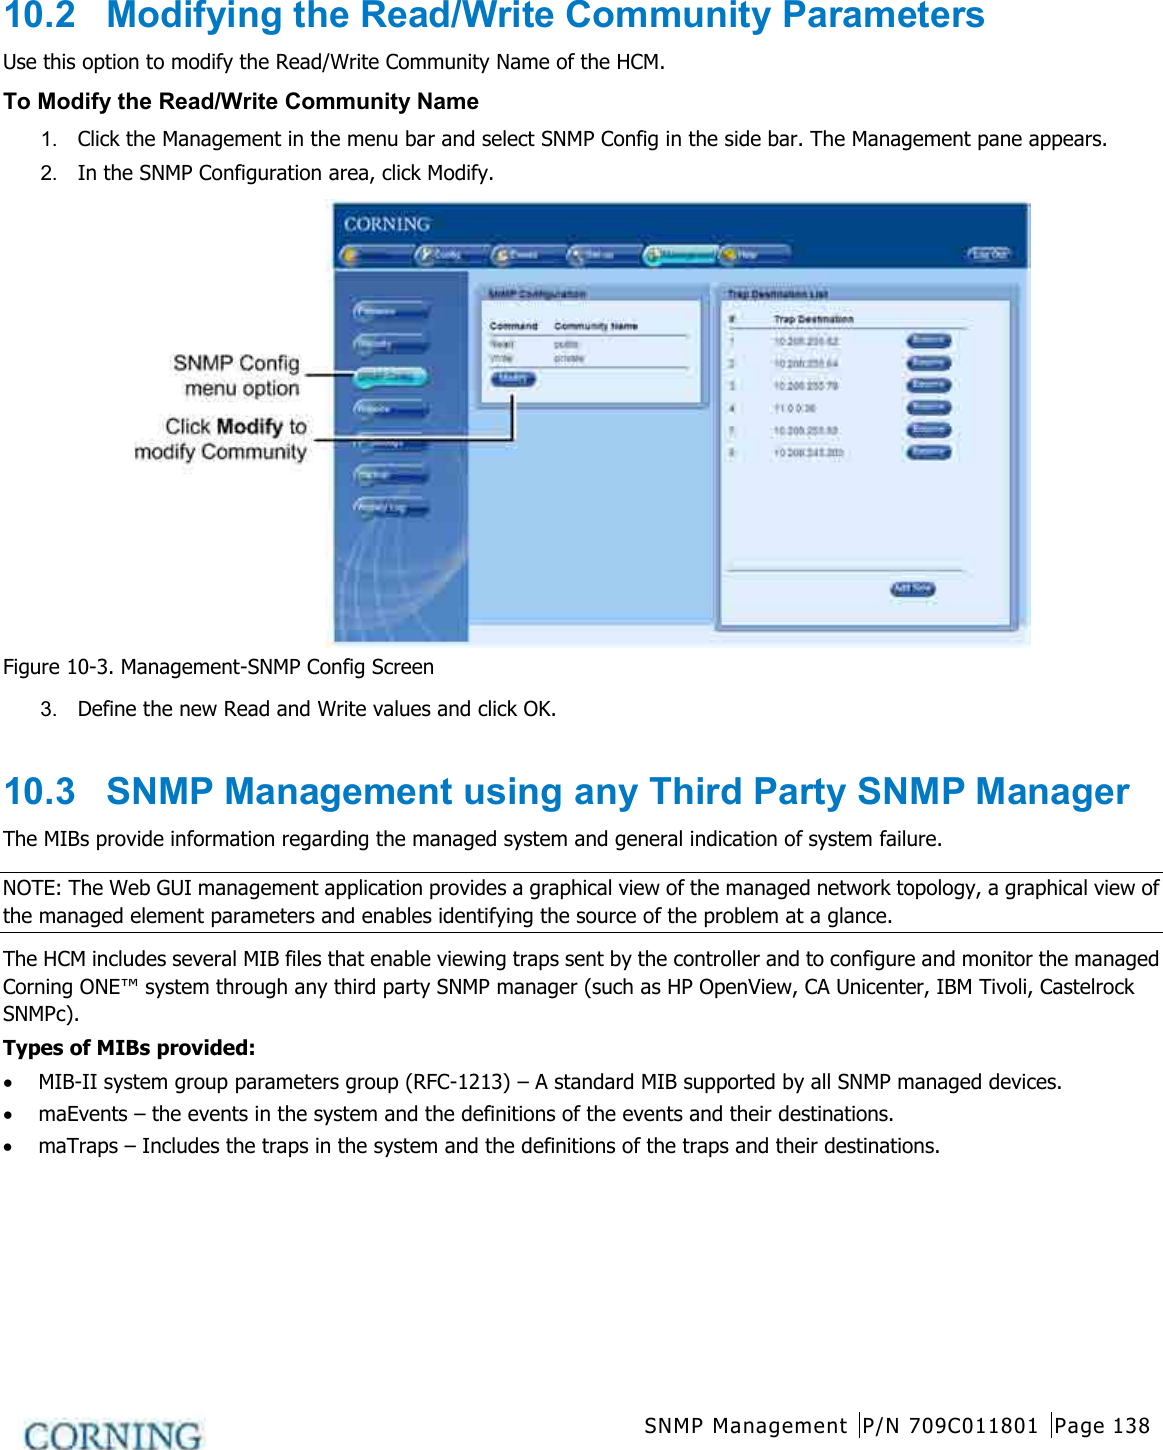  SNMP Management P/N 709C011801 Page 138   10.2  Modifying the Read/Write Community Parameters Use this option to modify the Read/Write Community Name of the HCM. To Modify the Read/Write Community Name 1.  Click the Management in the menu bar and select SNMP Config in the side bar. The Management pane appears. 2.  In the SNMP Configuration area, click Modify.  Figure  10-3. Management-SNMP Config Screen 3.  Define the new Read and Write values and click OK.  10.3  SNMP Management using any Third Party SNMP Manager The MIBs provide information regarding the managed system and general indication of system failure. NOTE: The Web GUI management application provides a graphical view of the managed network topology, a graphical view of the managed element parameters and enables identifying the source of the problem at a glance. The HCM includes several MIB files that enable viewing traps sent by the controller and to configure and monitor the managed Corning ONE™ system through any third party SNMP manager (such as HP OpenView, CA Unicenter, IBM Tivoli, Castelrock SNMPc). Types of MIBs provided: • MIB-II system group parameters group (RFC-1213) – A standard MIB supported by all SNMP managed devices. • maEvents – the events in the system and the definitions of the events and their destinations. • maTraps – Includes the traps in the system and the definitions of the traps and their destinations.    